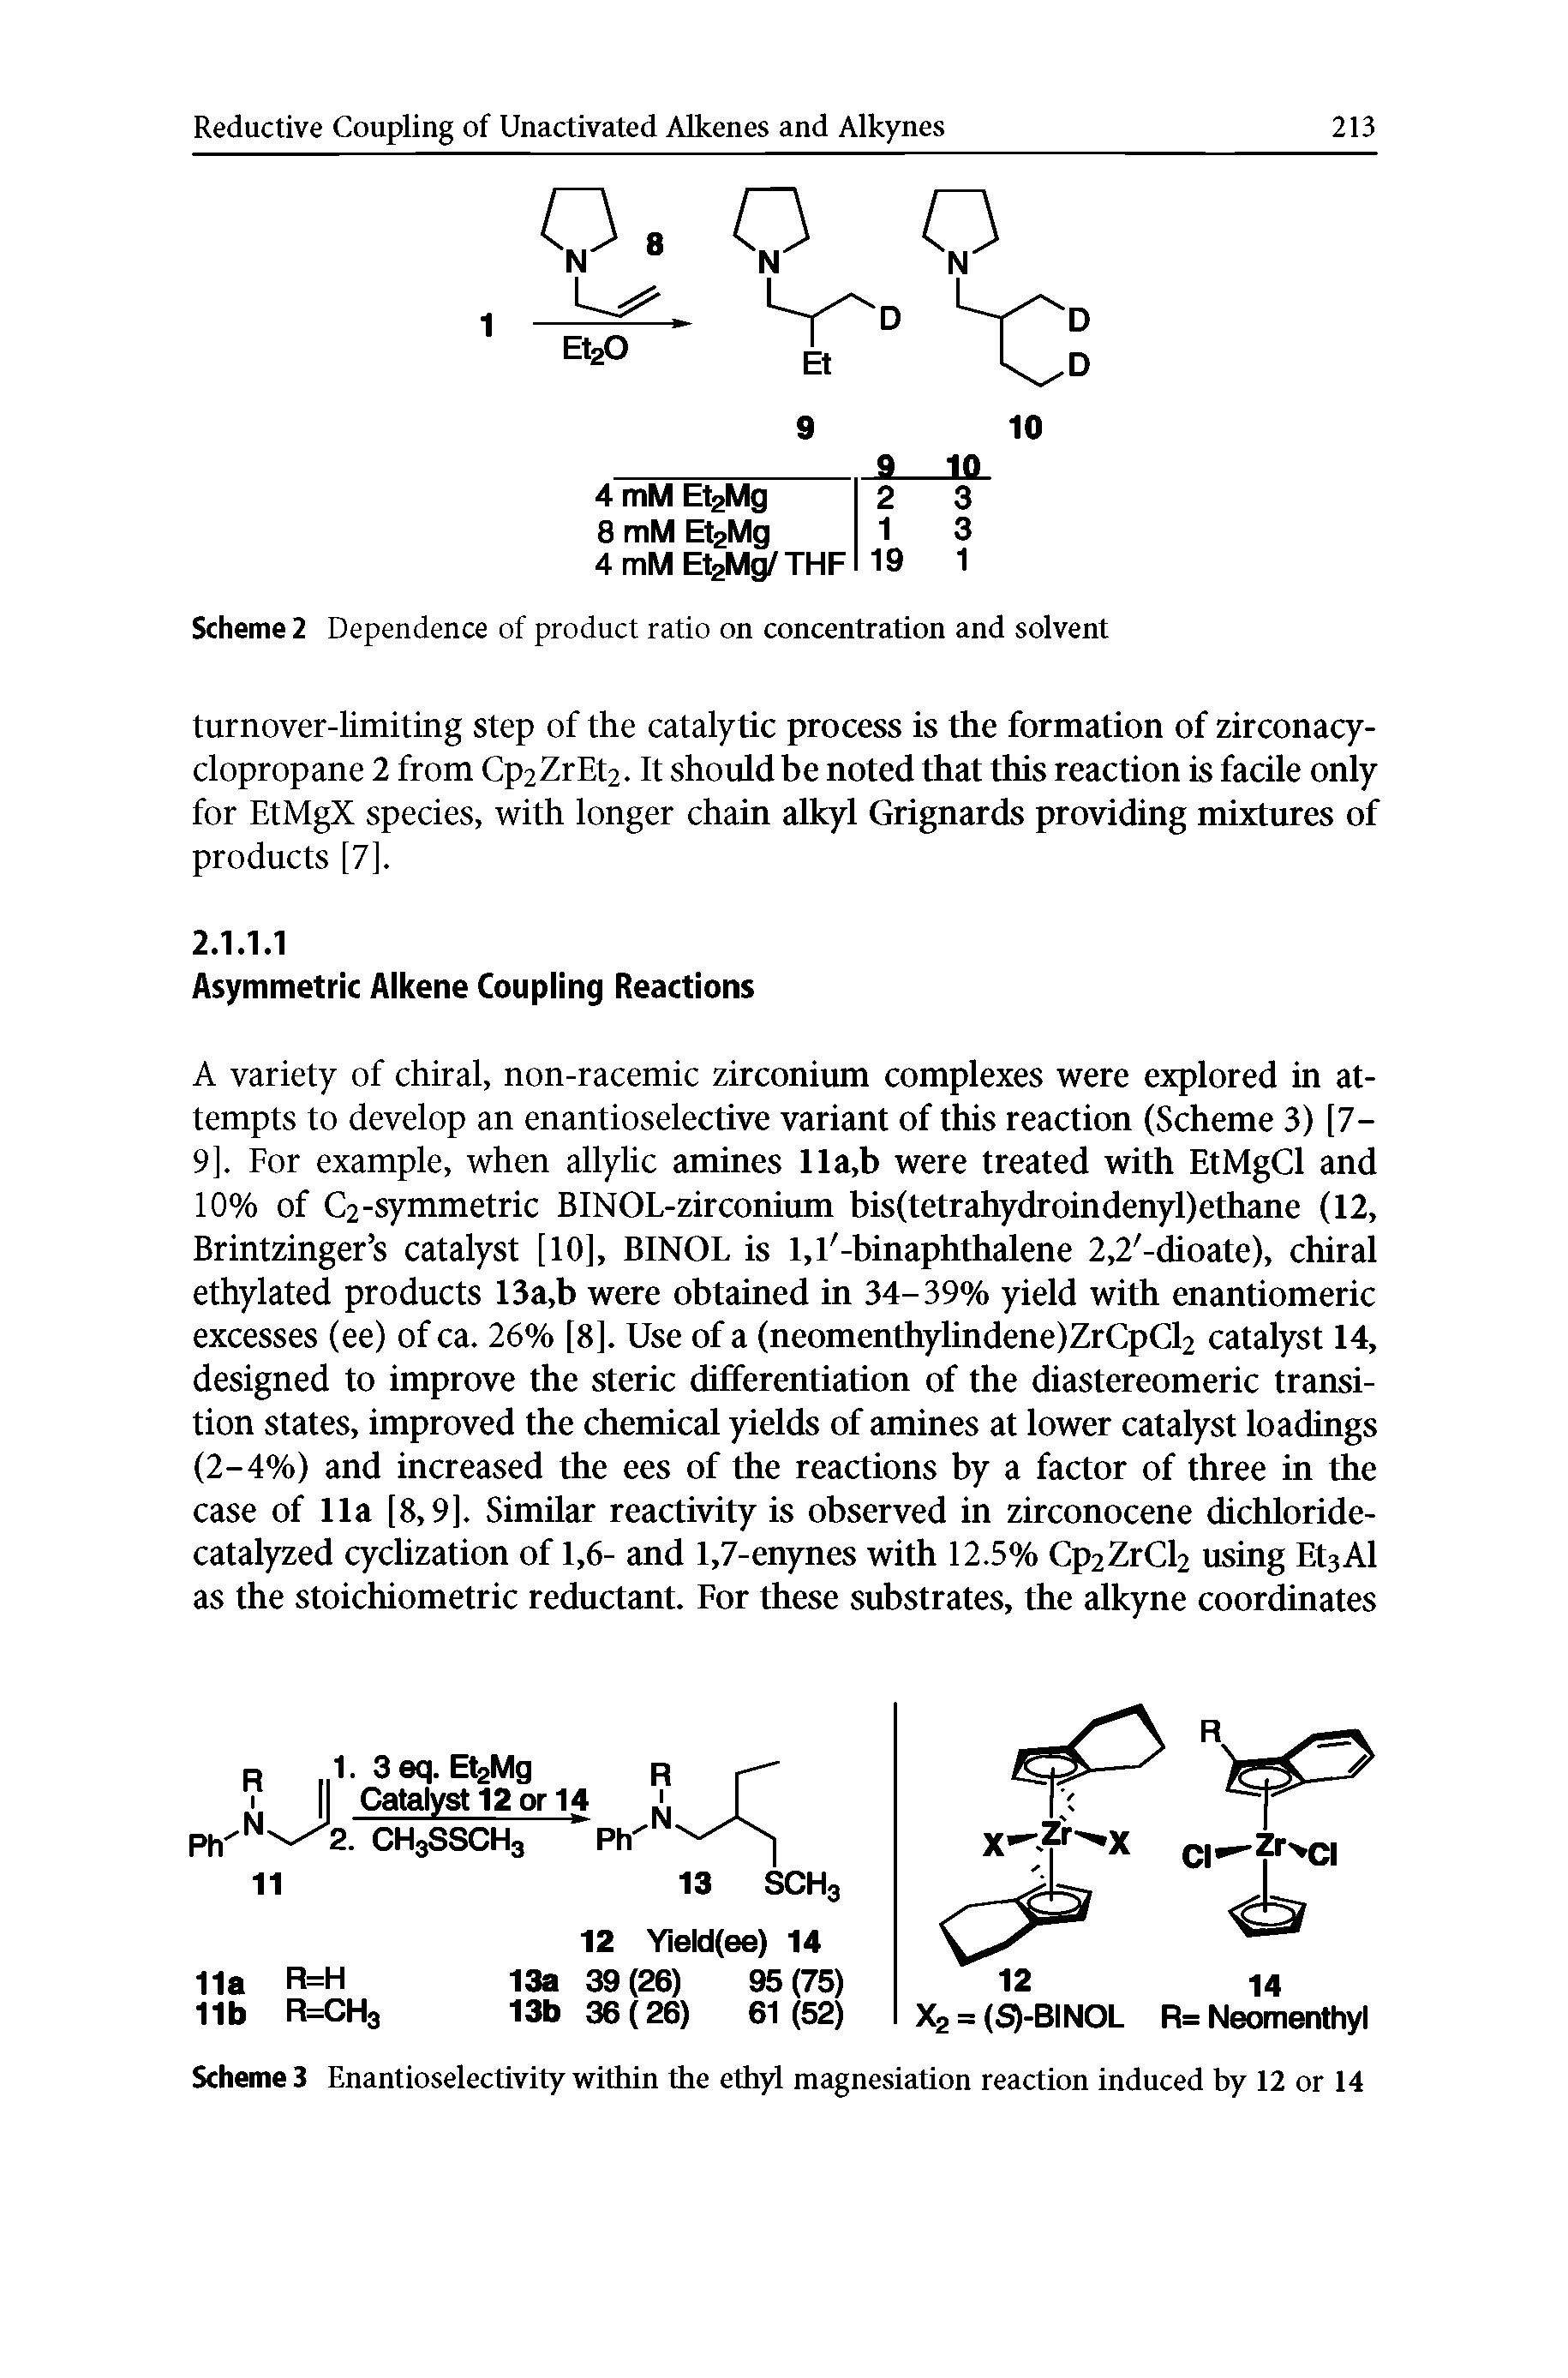 Scheme 3 Enantioselectivity within the ethyl magnesiation reaction induced by 12 or 14...